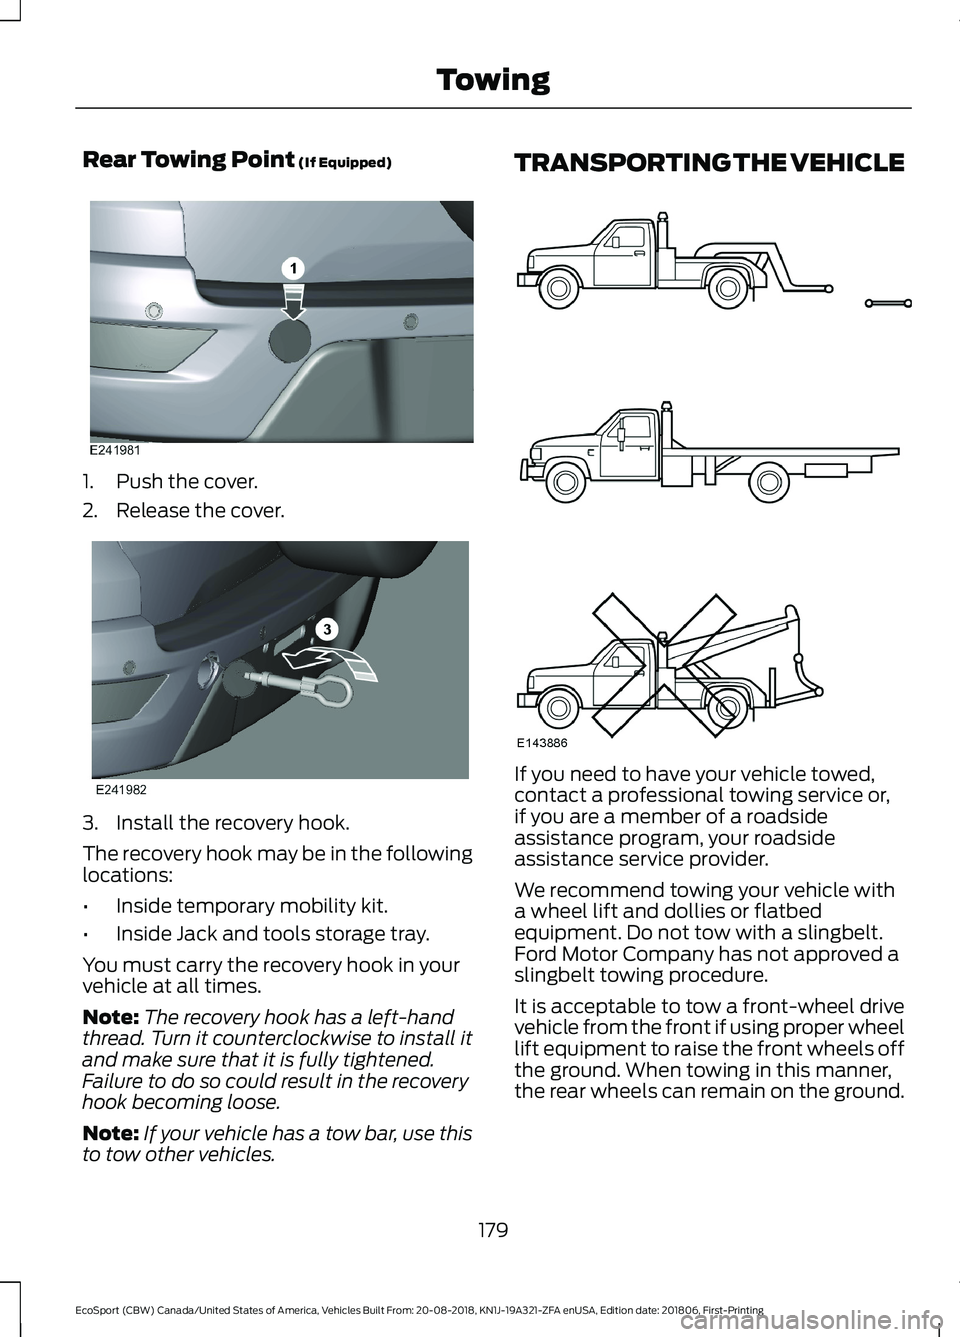 FORD ECOSPORT 2019  Owners Manual Rear Towing Point (If Equipped)
1.Push the cover.
2.Release the cover.
3.Install the recovery hook.
The recovery hook may be in the followinglocations:
•Inside temporary mobility kit.
•Inside Jack